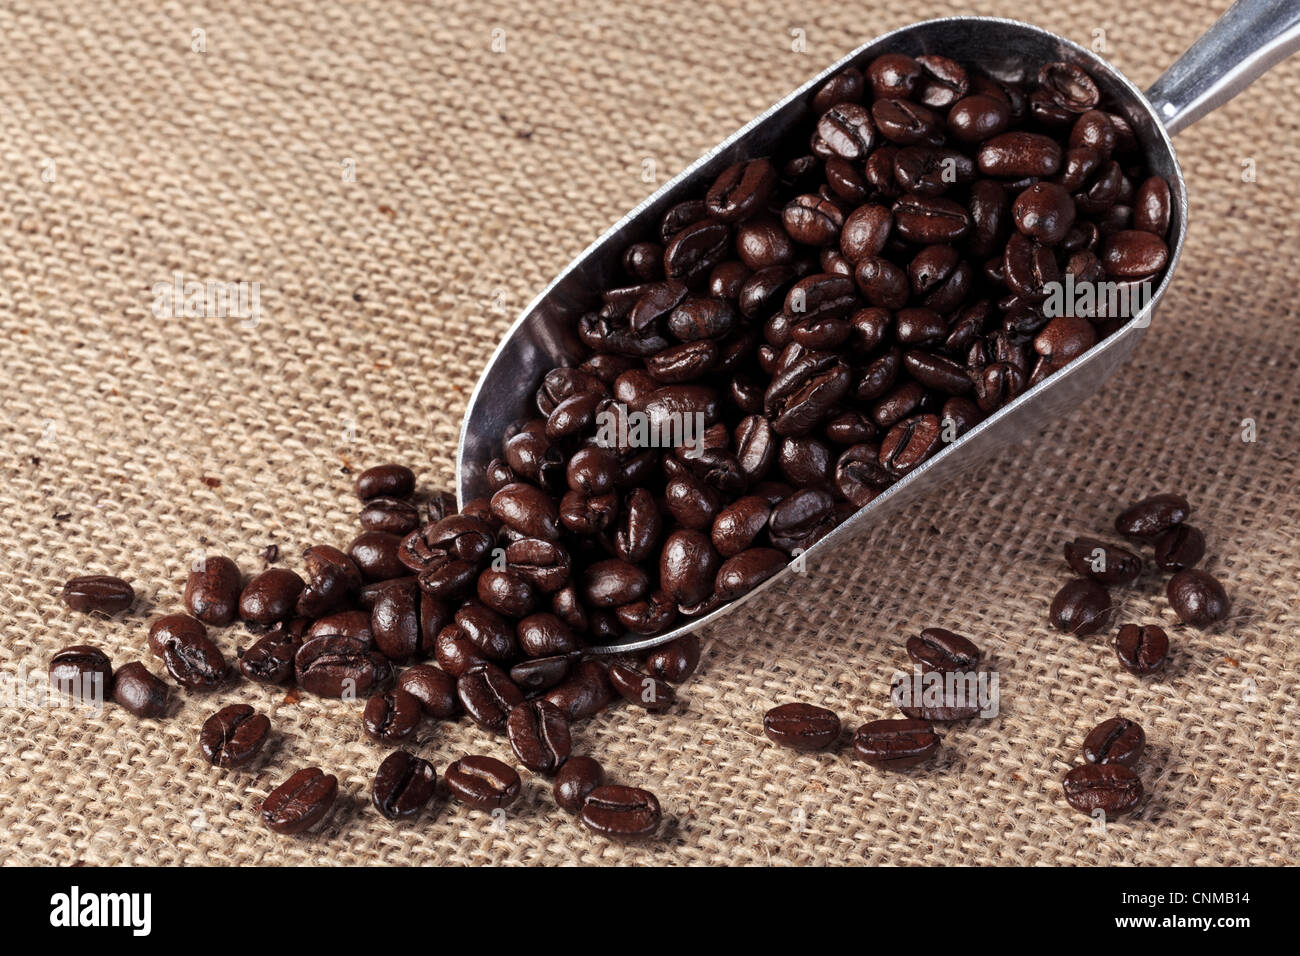 Photo of fresh roasted arabica and robusta coffee beans in a metal scoop on a hesian sack background. Stock Photo